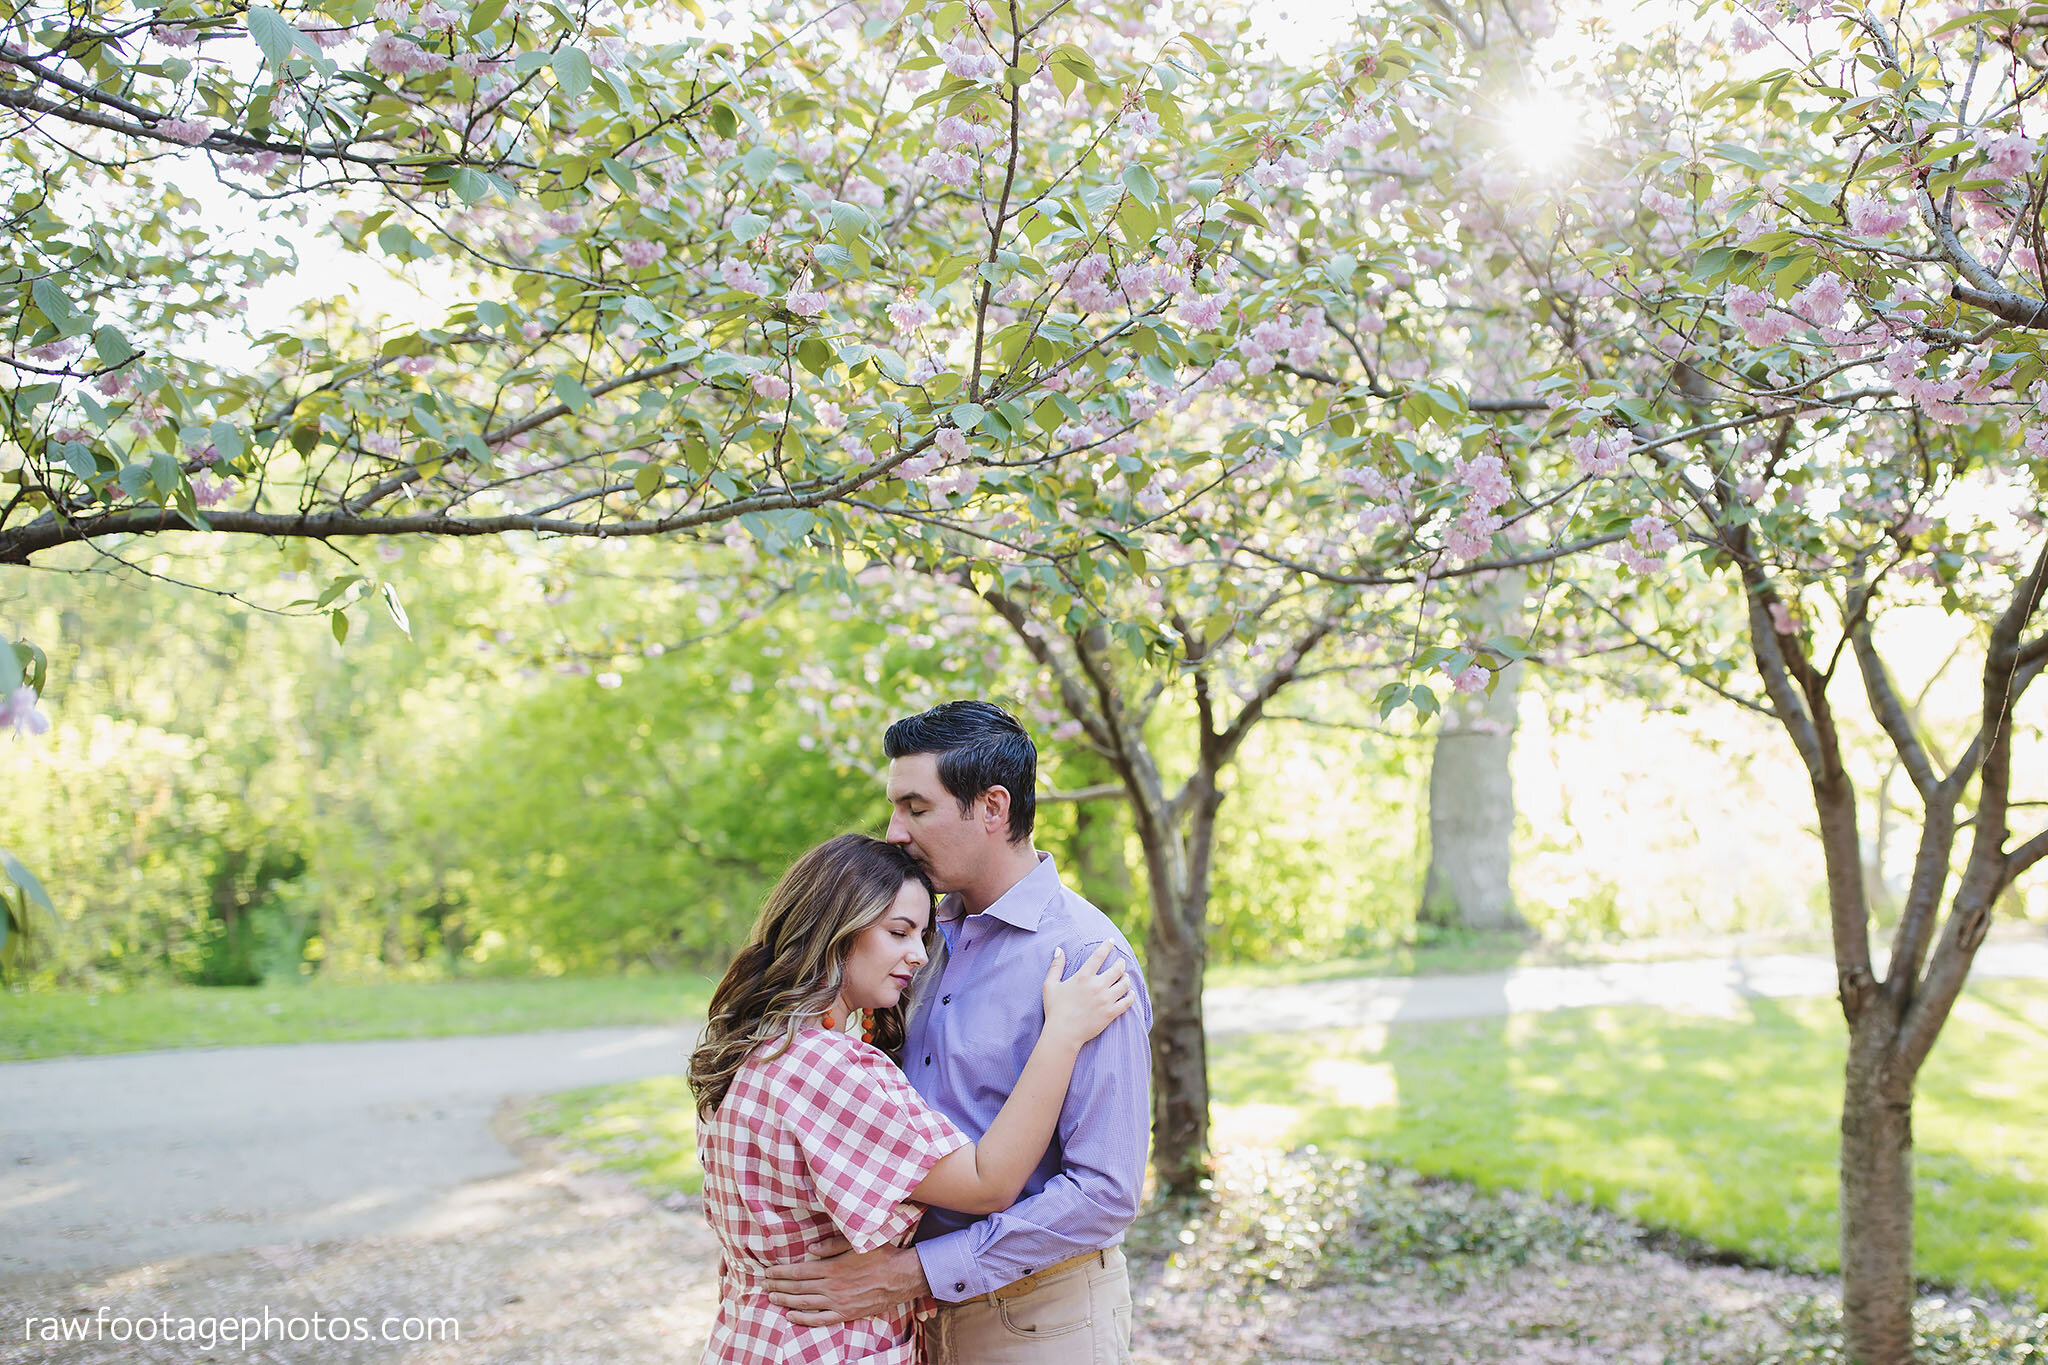 london_ontario_wedding_photographer-raw_footage_photography-spring_engagement_session-spring_blossoms-ivey_park_001.jpg